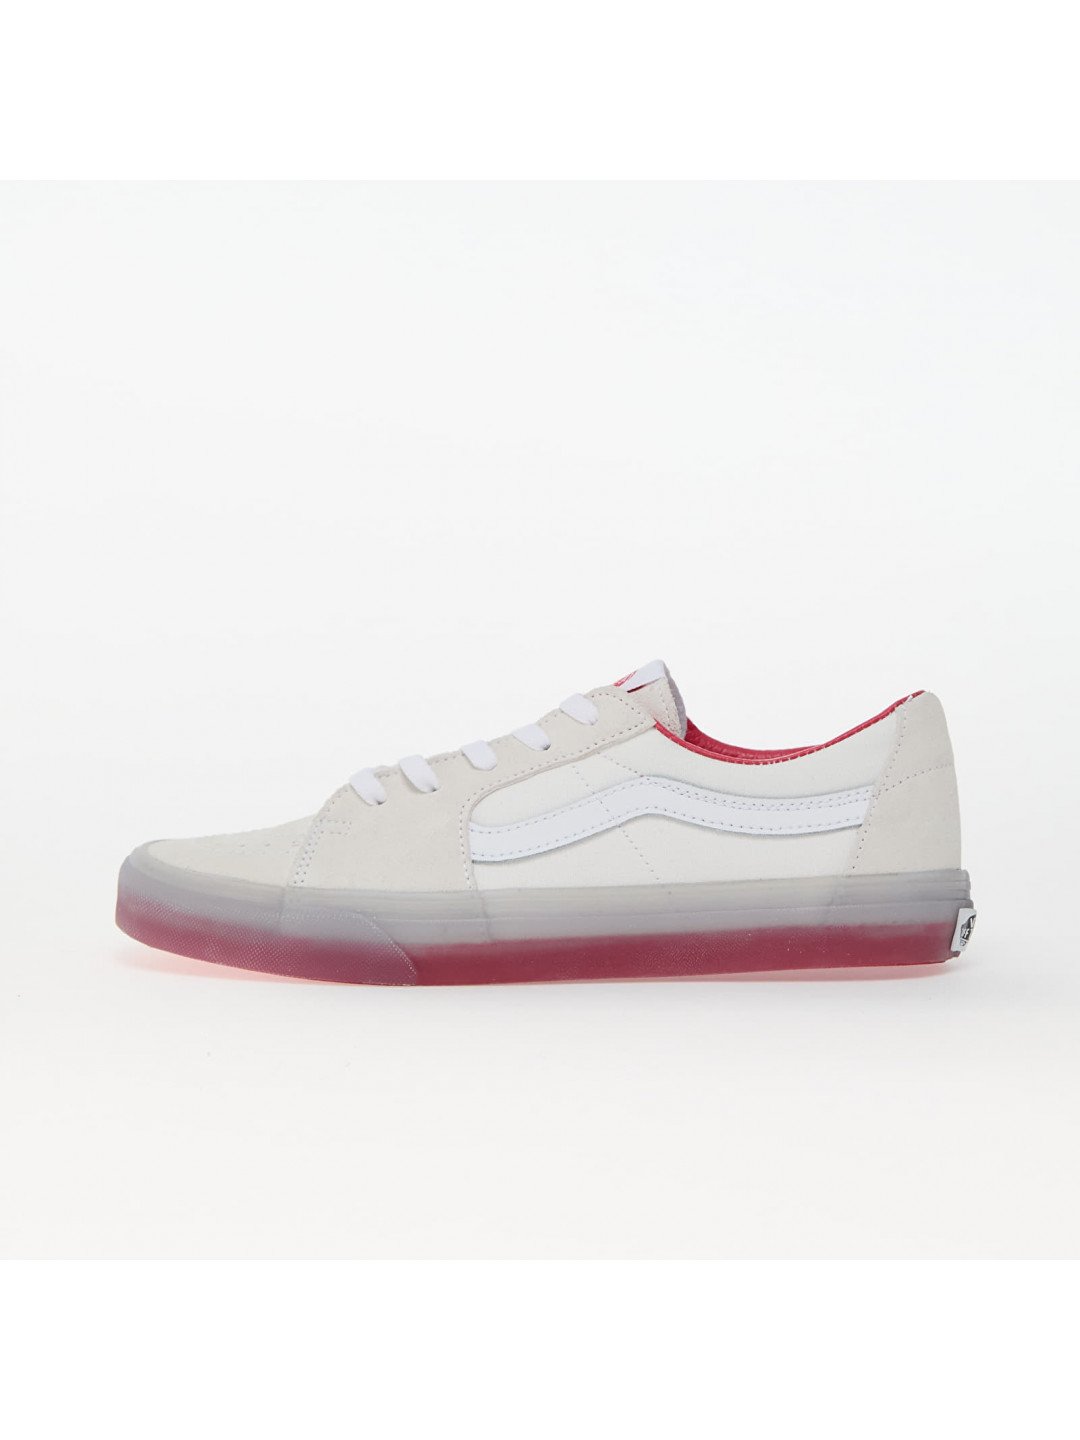 Vans Sk8-Low Translucent Sidewall White Red